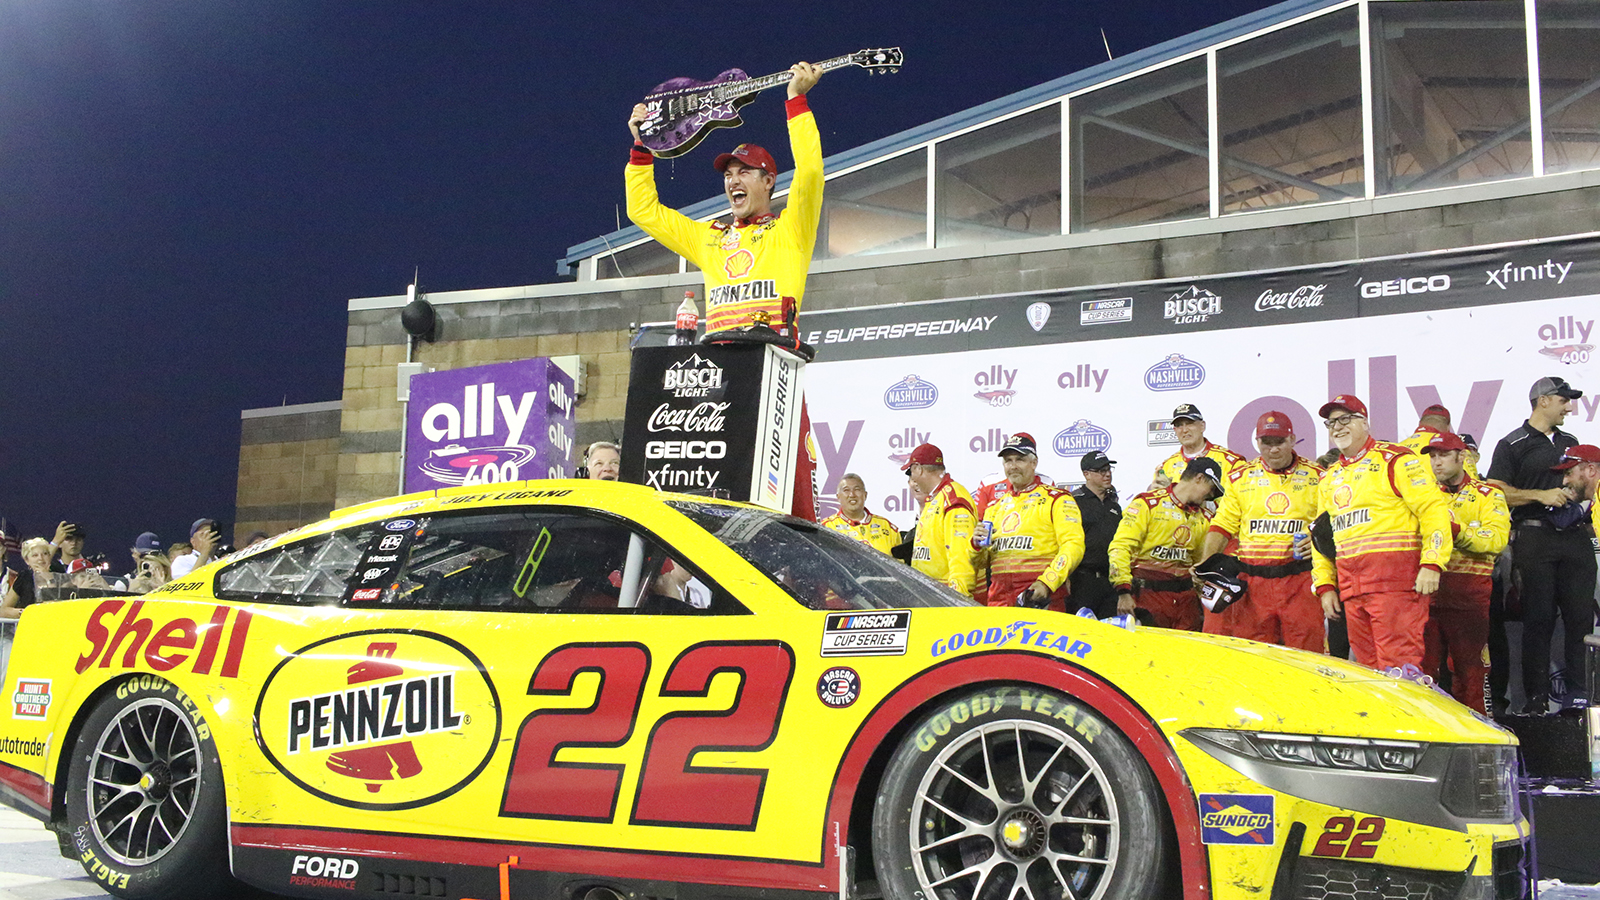 Joey Logano wins Ally 400 NASCAR Cup Series race at Nashville Superspeedway post-race inspection complete